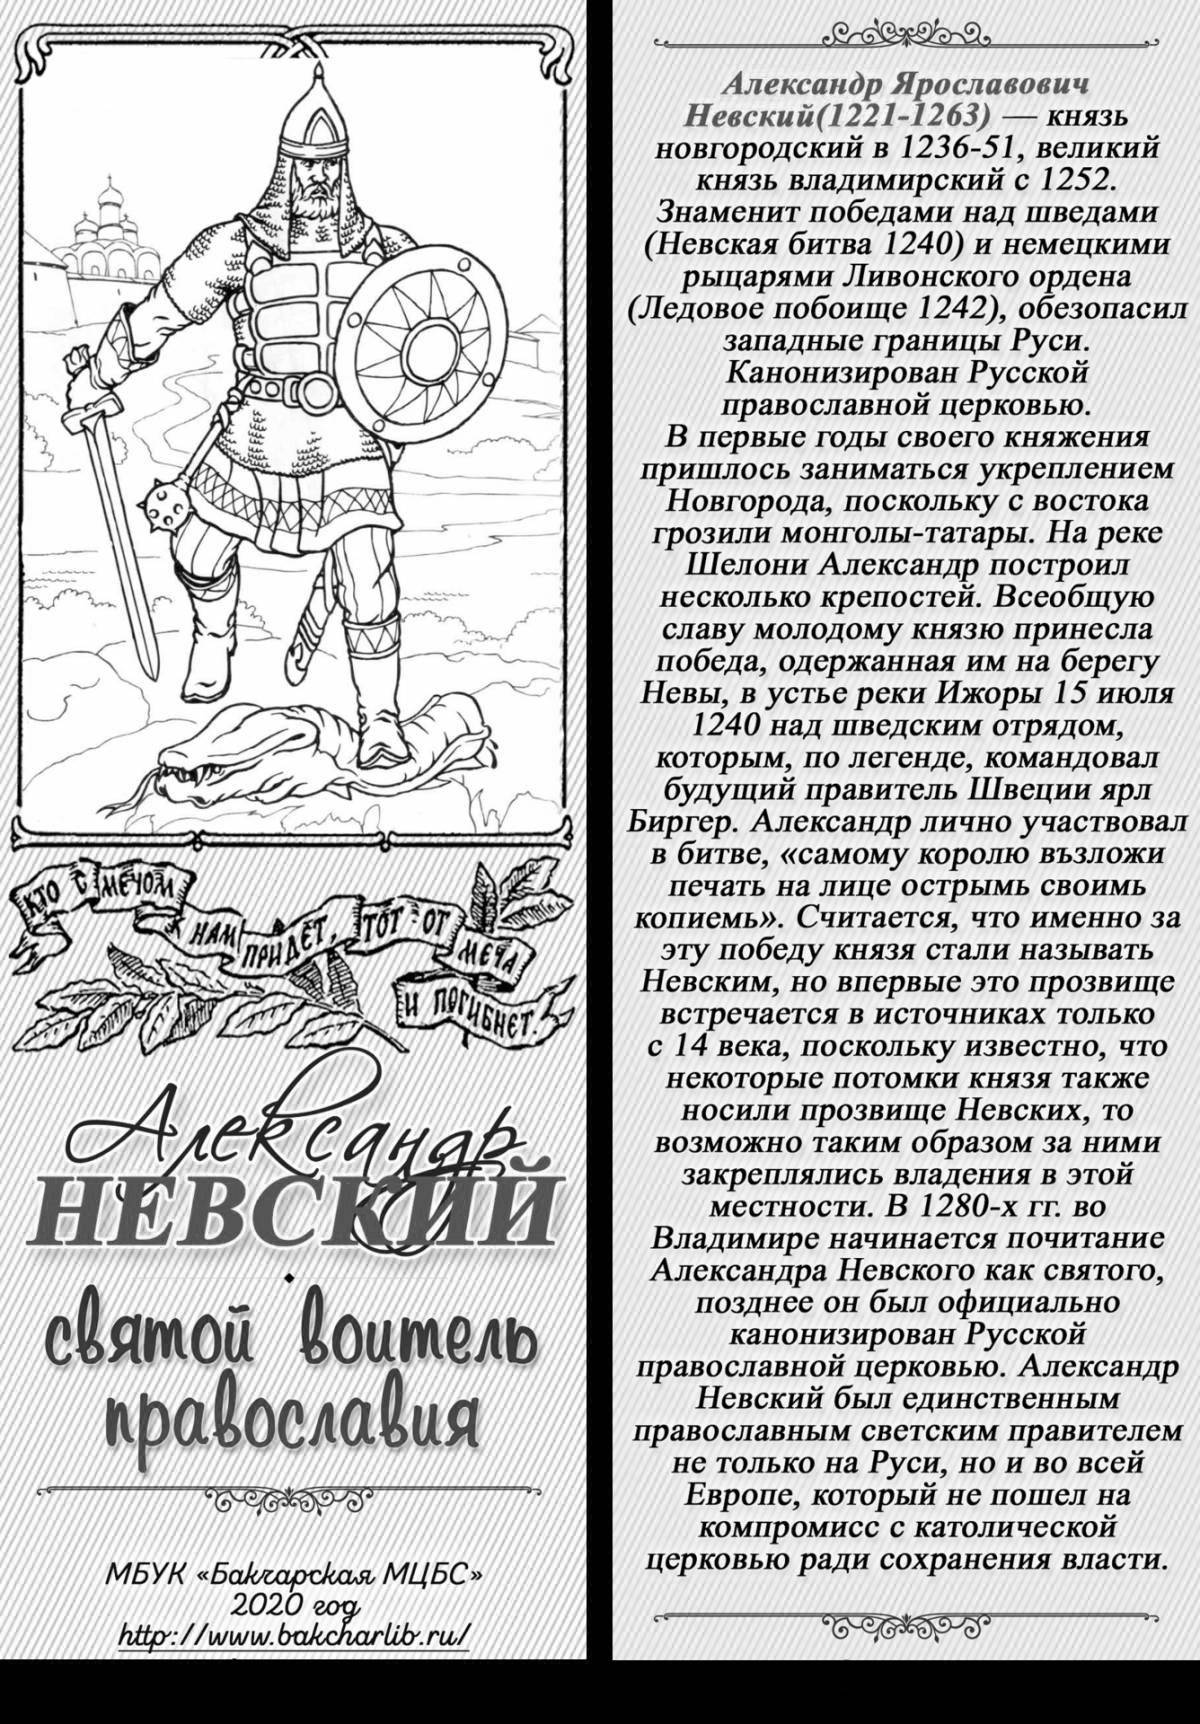 Coloring page cheerful alexander nevsky